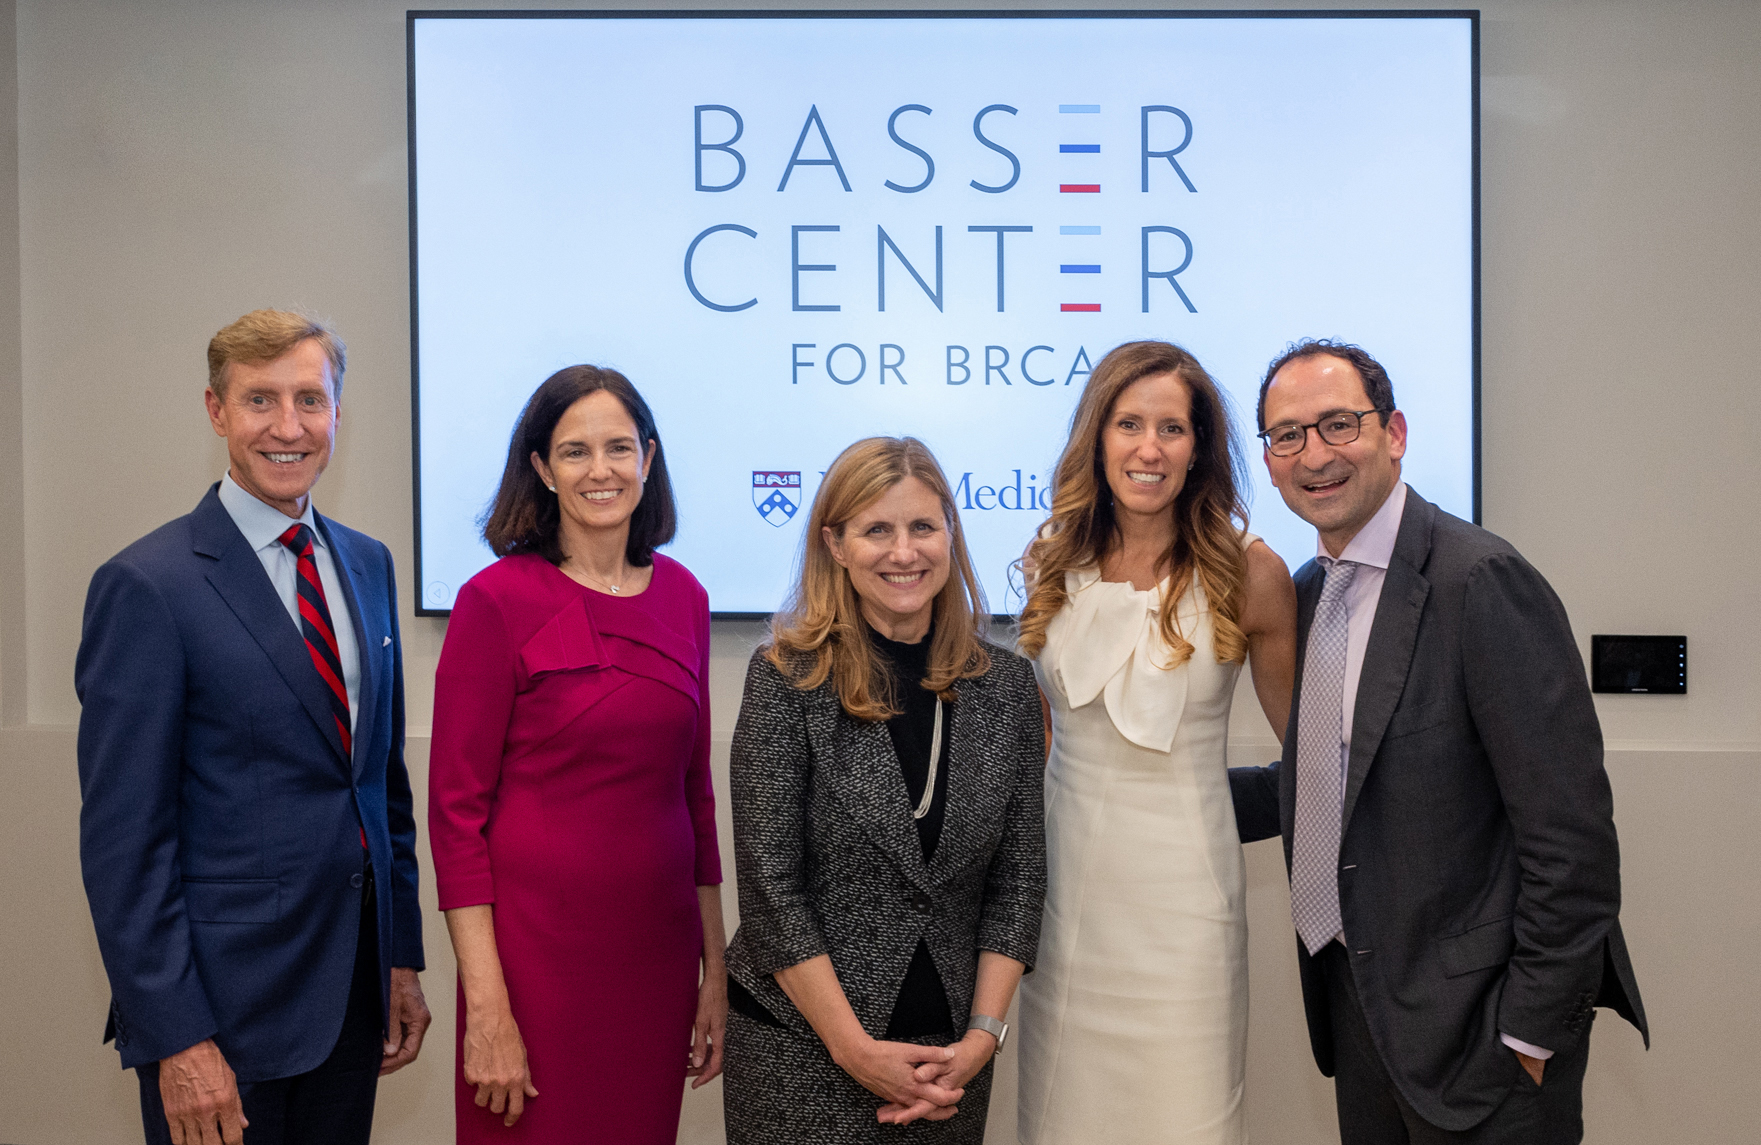 J. Larry Jameson, Susan Domcheck, Liz Magill, Mindy Gray, and Jon Gray in front of a sign that reads Basser Center for BRCA.